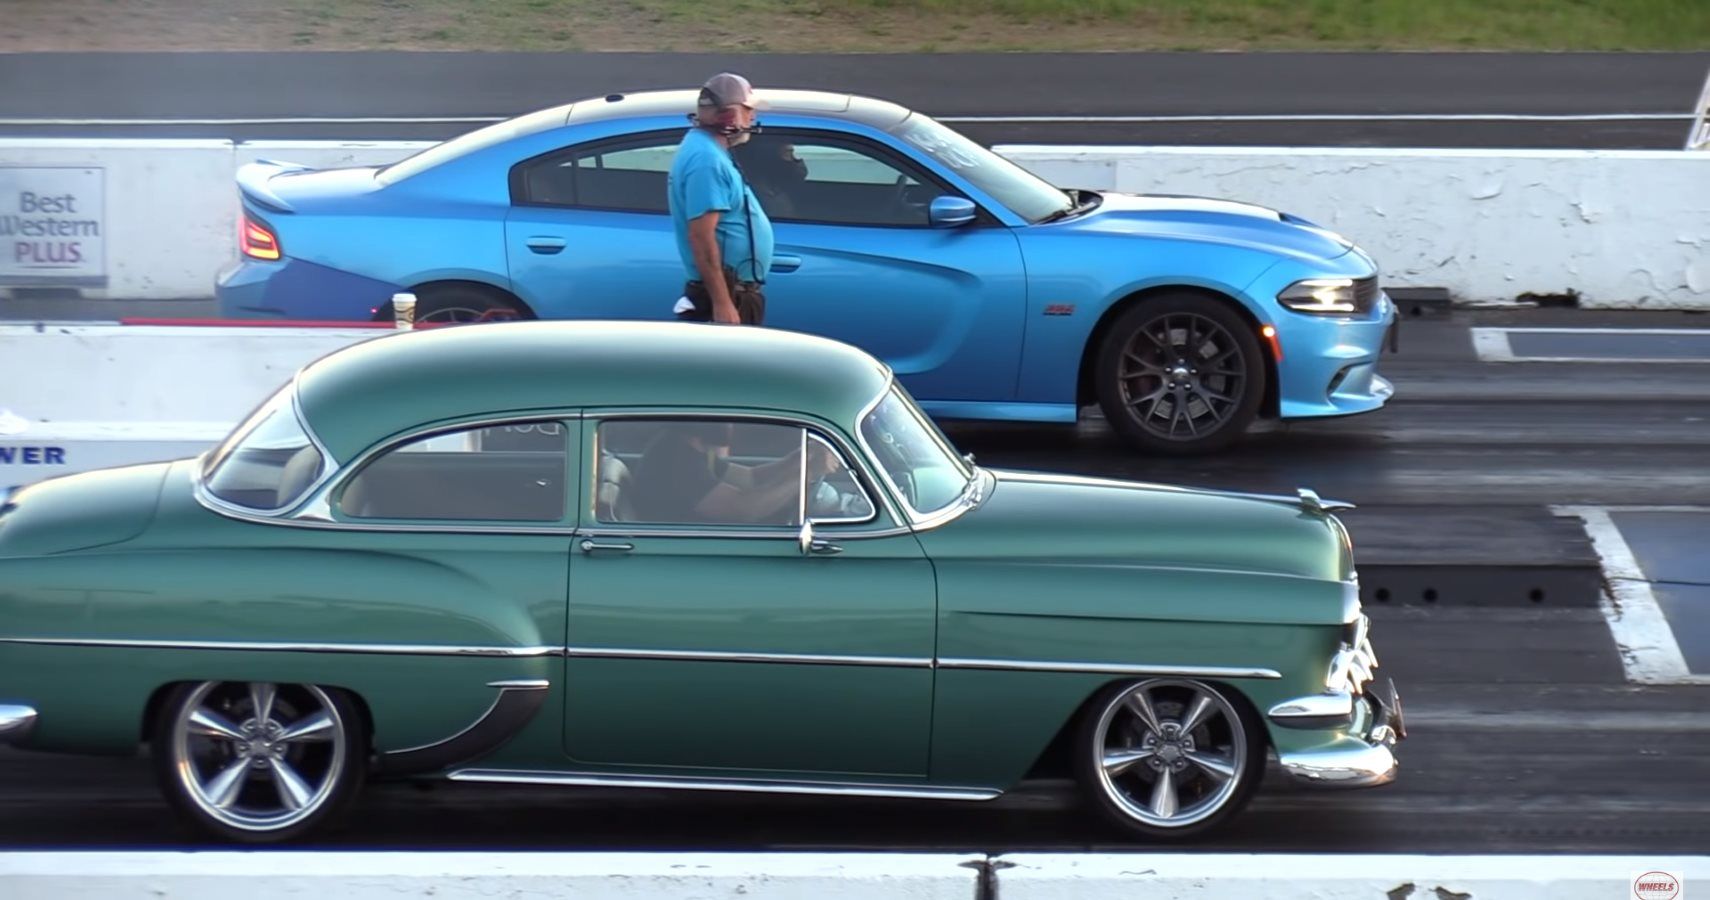 Dodge Charger SRT Takes On Ancient Sleeper Car In Surprising Drag Race